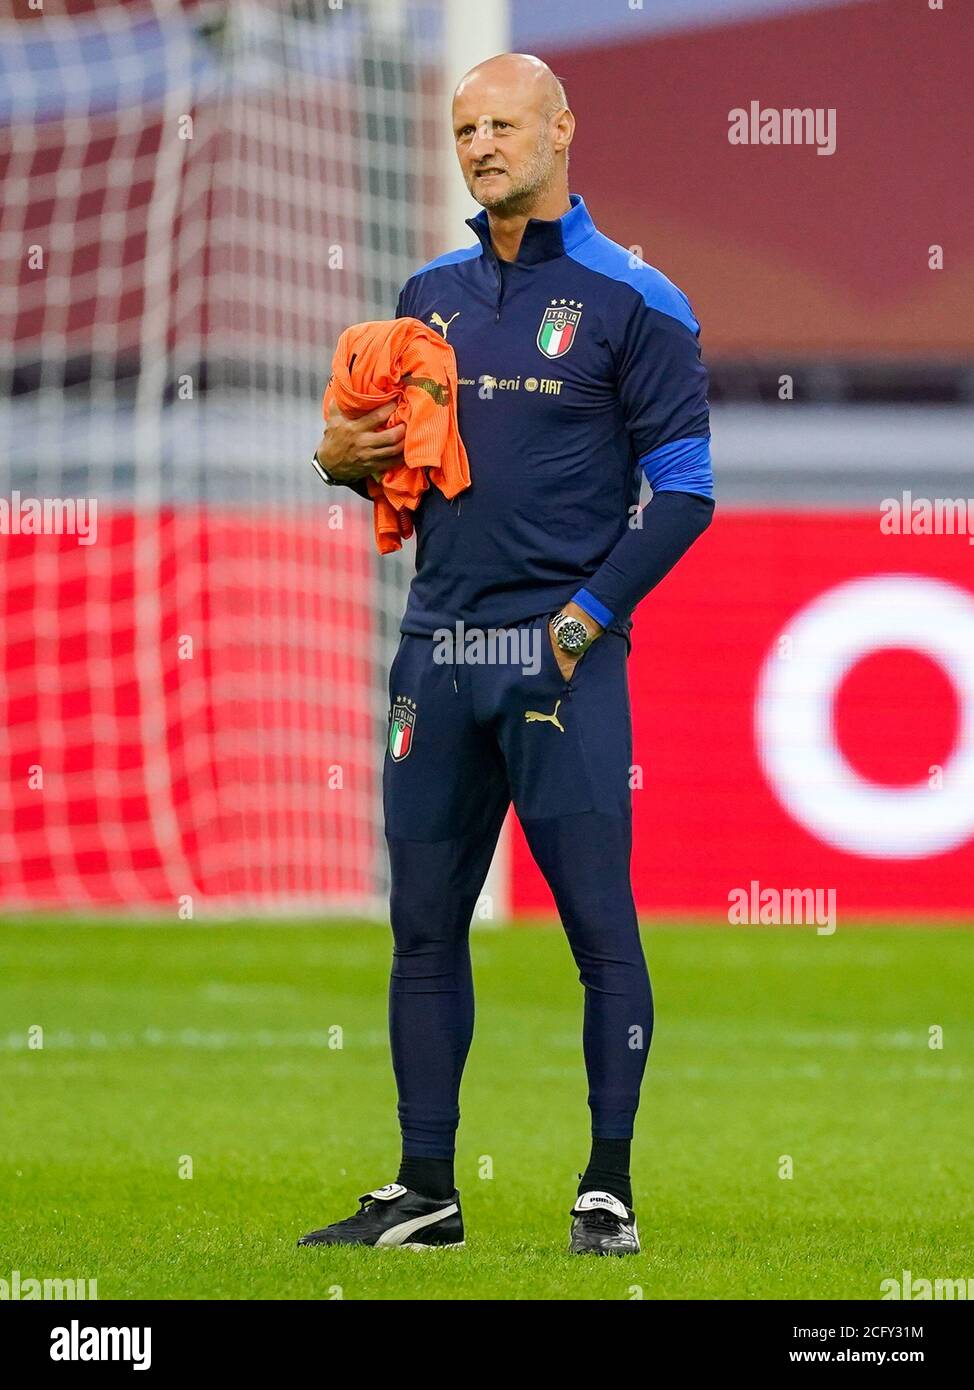 ZEIST, NETHERLANDS - SEPTEMBER 7: Attilio Lombardo of Italia before the nations league match between The Netherlands and Italy on september 7, 2020 in Zeist, The Netherlands.  *** Local Caption *** Attilio Lombardo Stock Photo